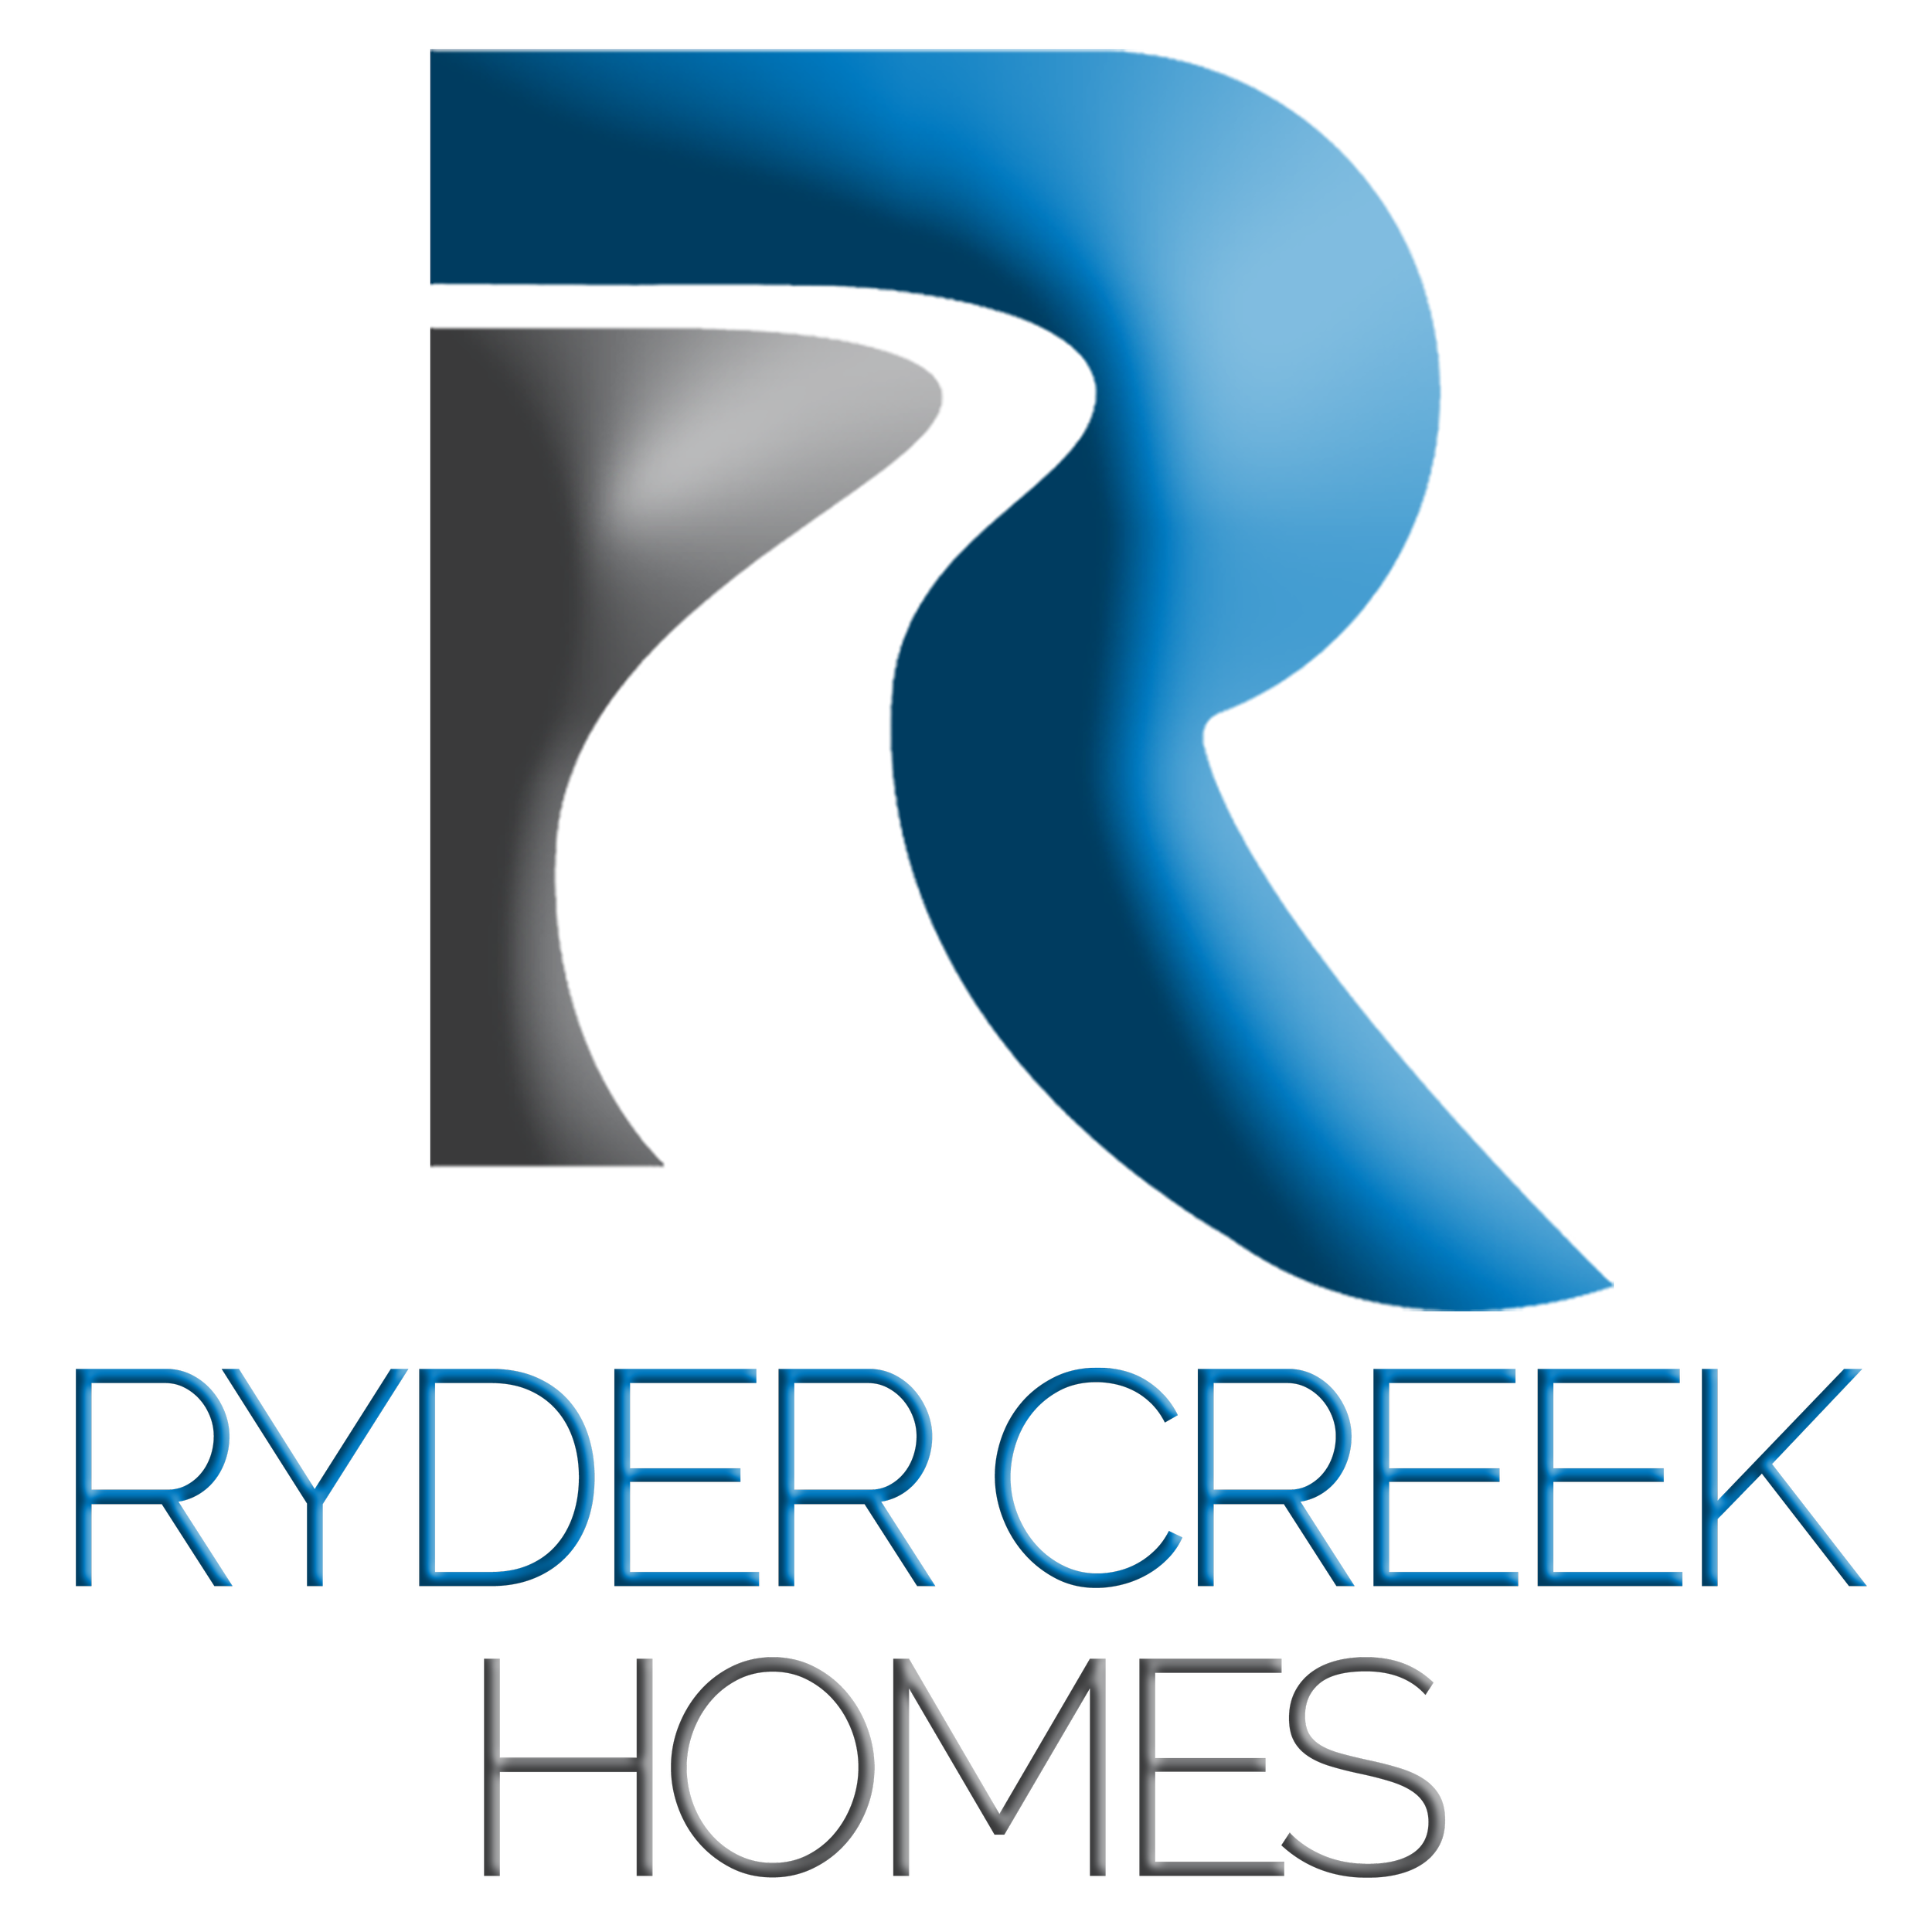 Ryder-Creek-Homes-Custom-Home-Builders-and-Developers-White-Rock-Logo-Square-22.0.1.png